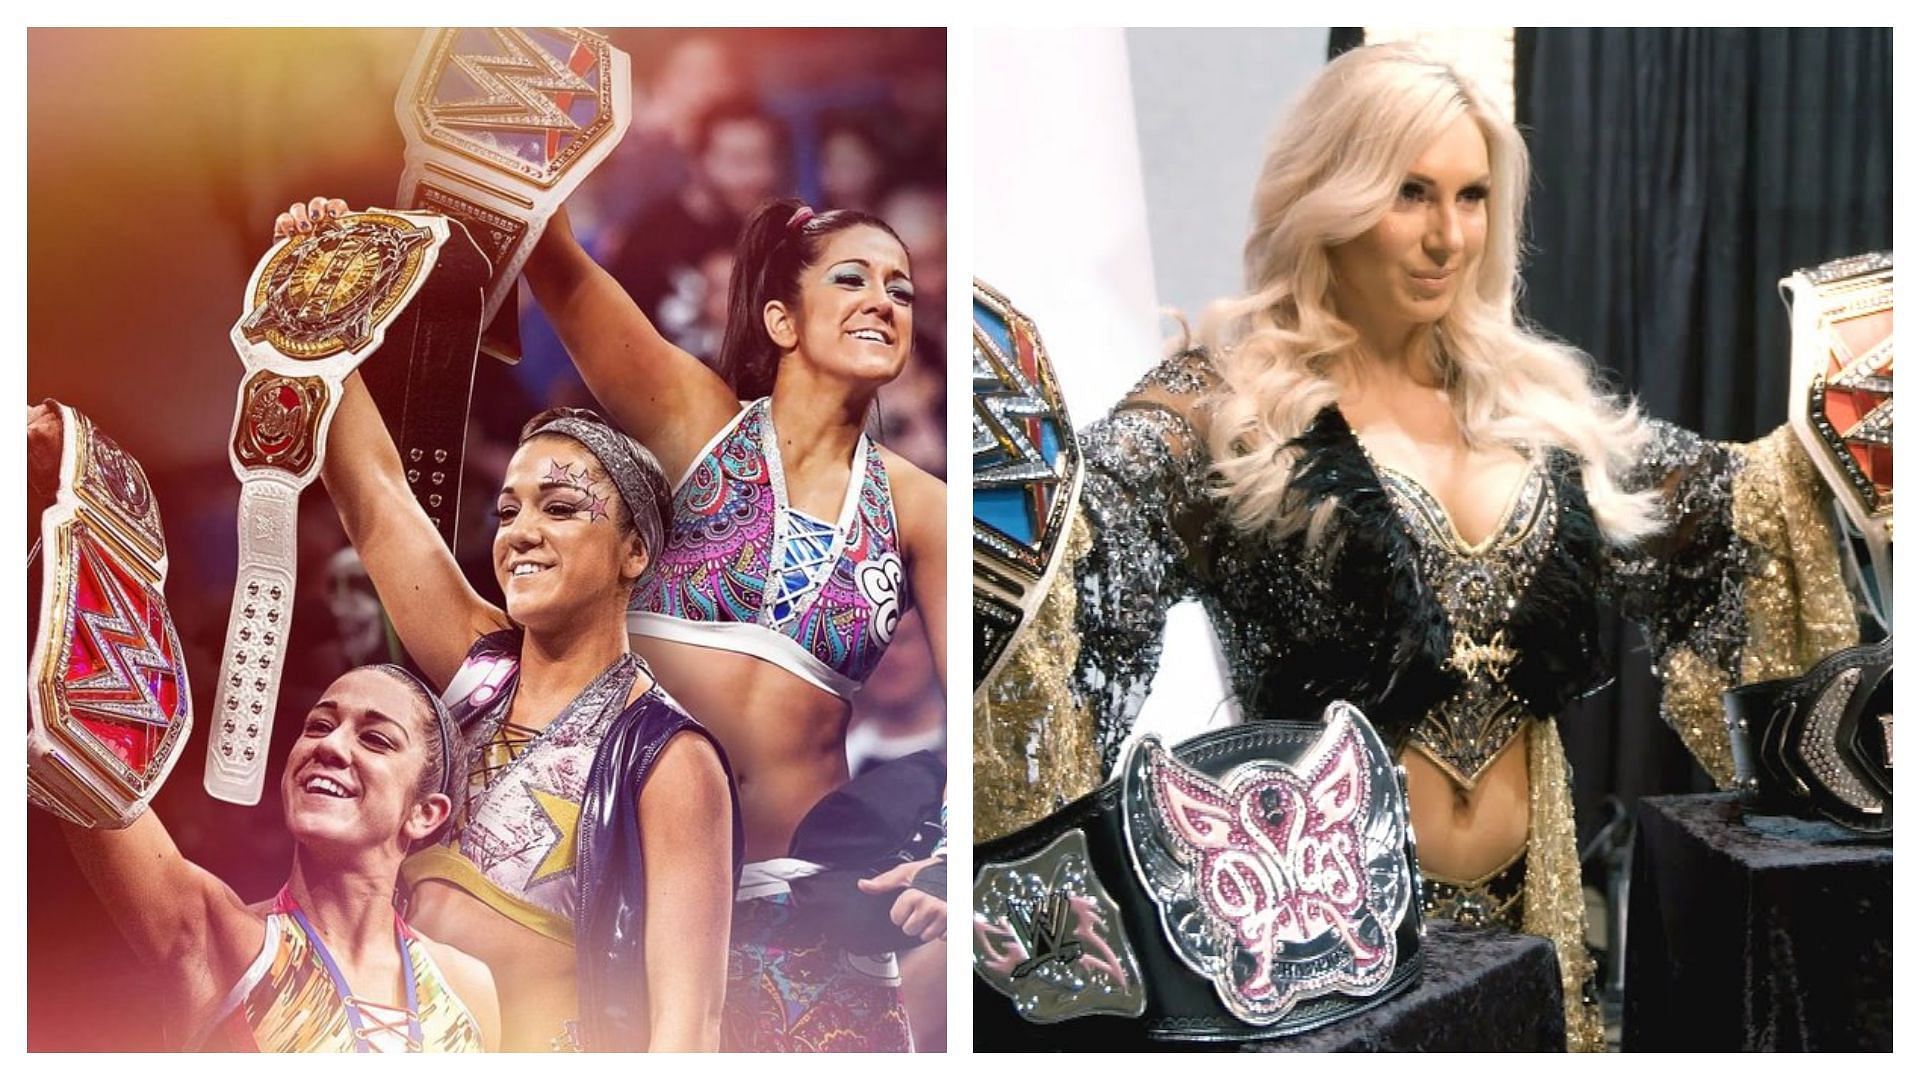 Bayley and Charlotte Flair have completed the Triple Crown in WWE